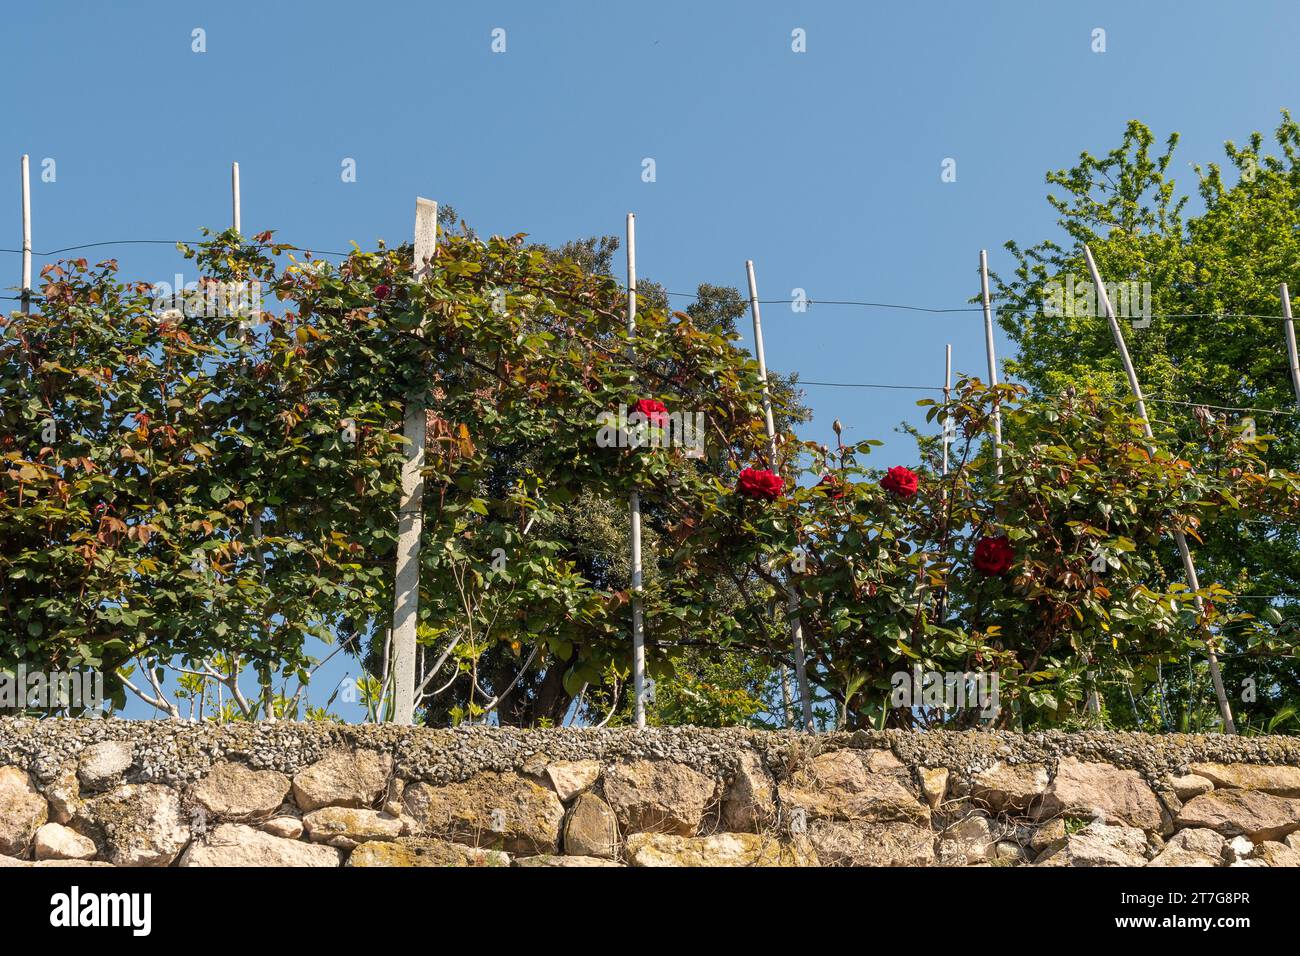 Red rose plant espalier trained on top of the stone wall of a terraced garden in spring, Savona, Liguria, Italy Stock Photo